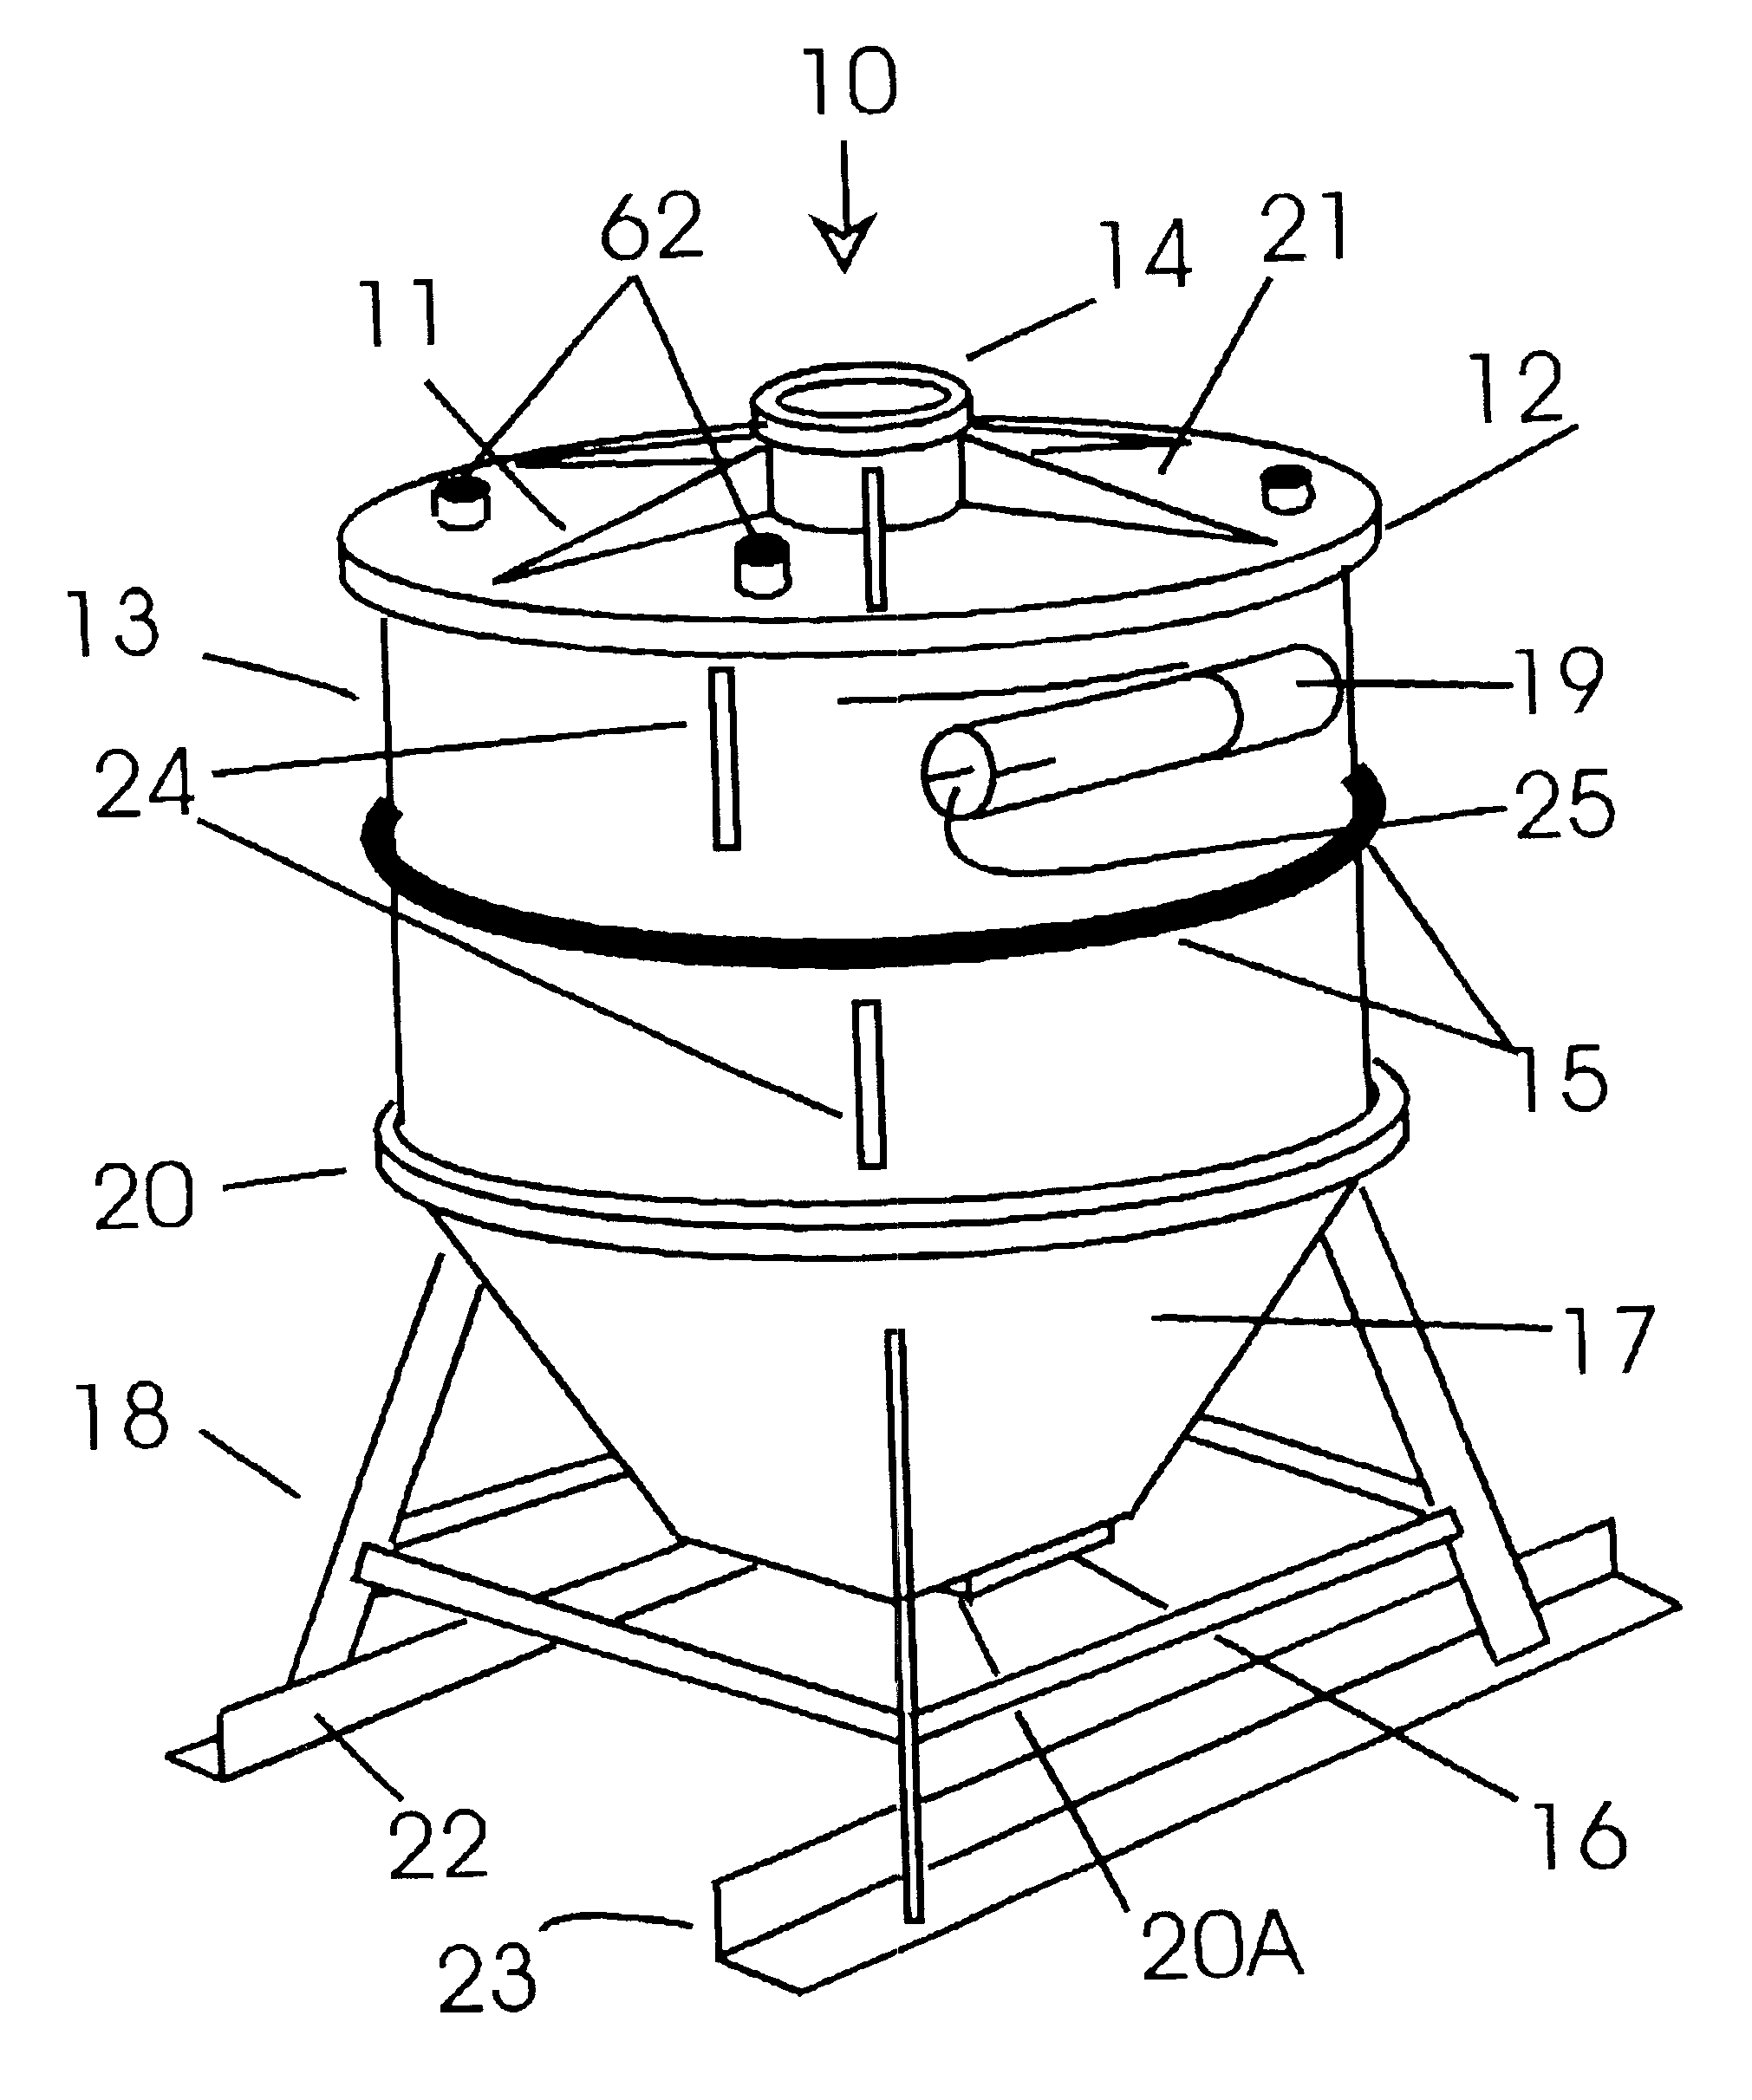 Vacuum cyclone for off-loading shrimp and other small seafood